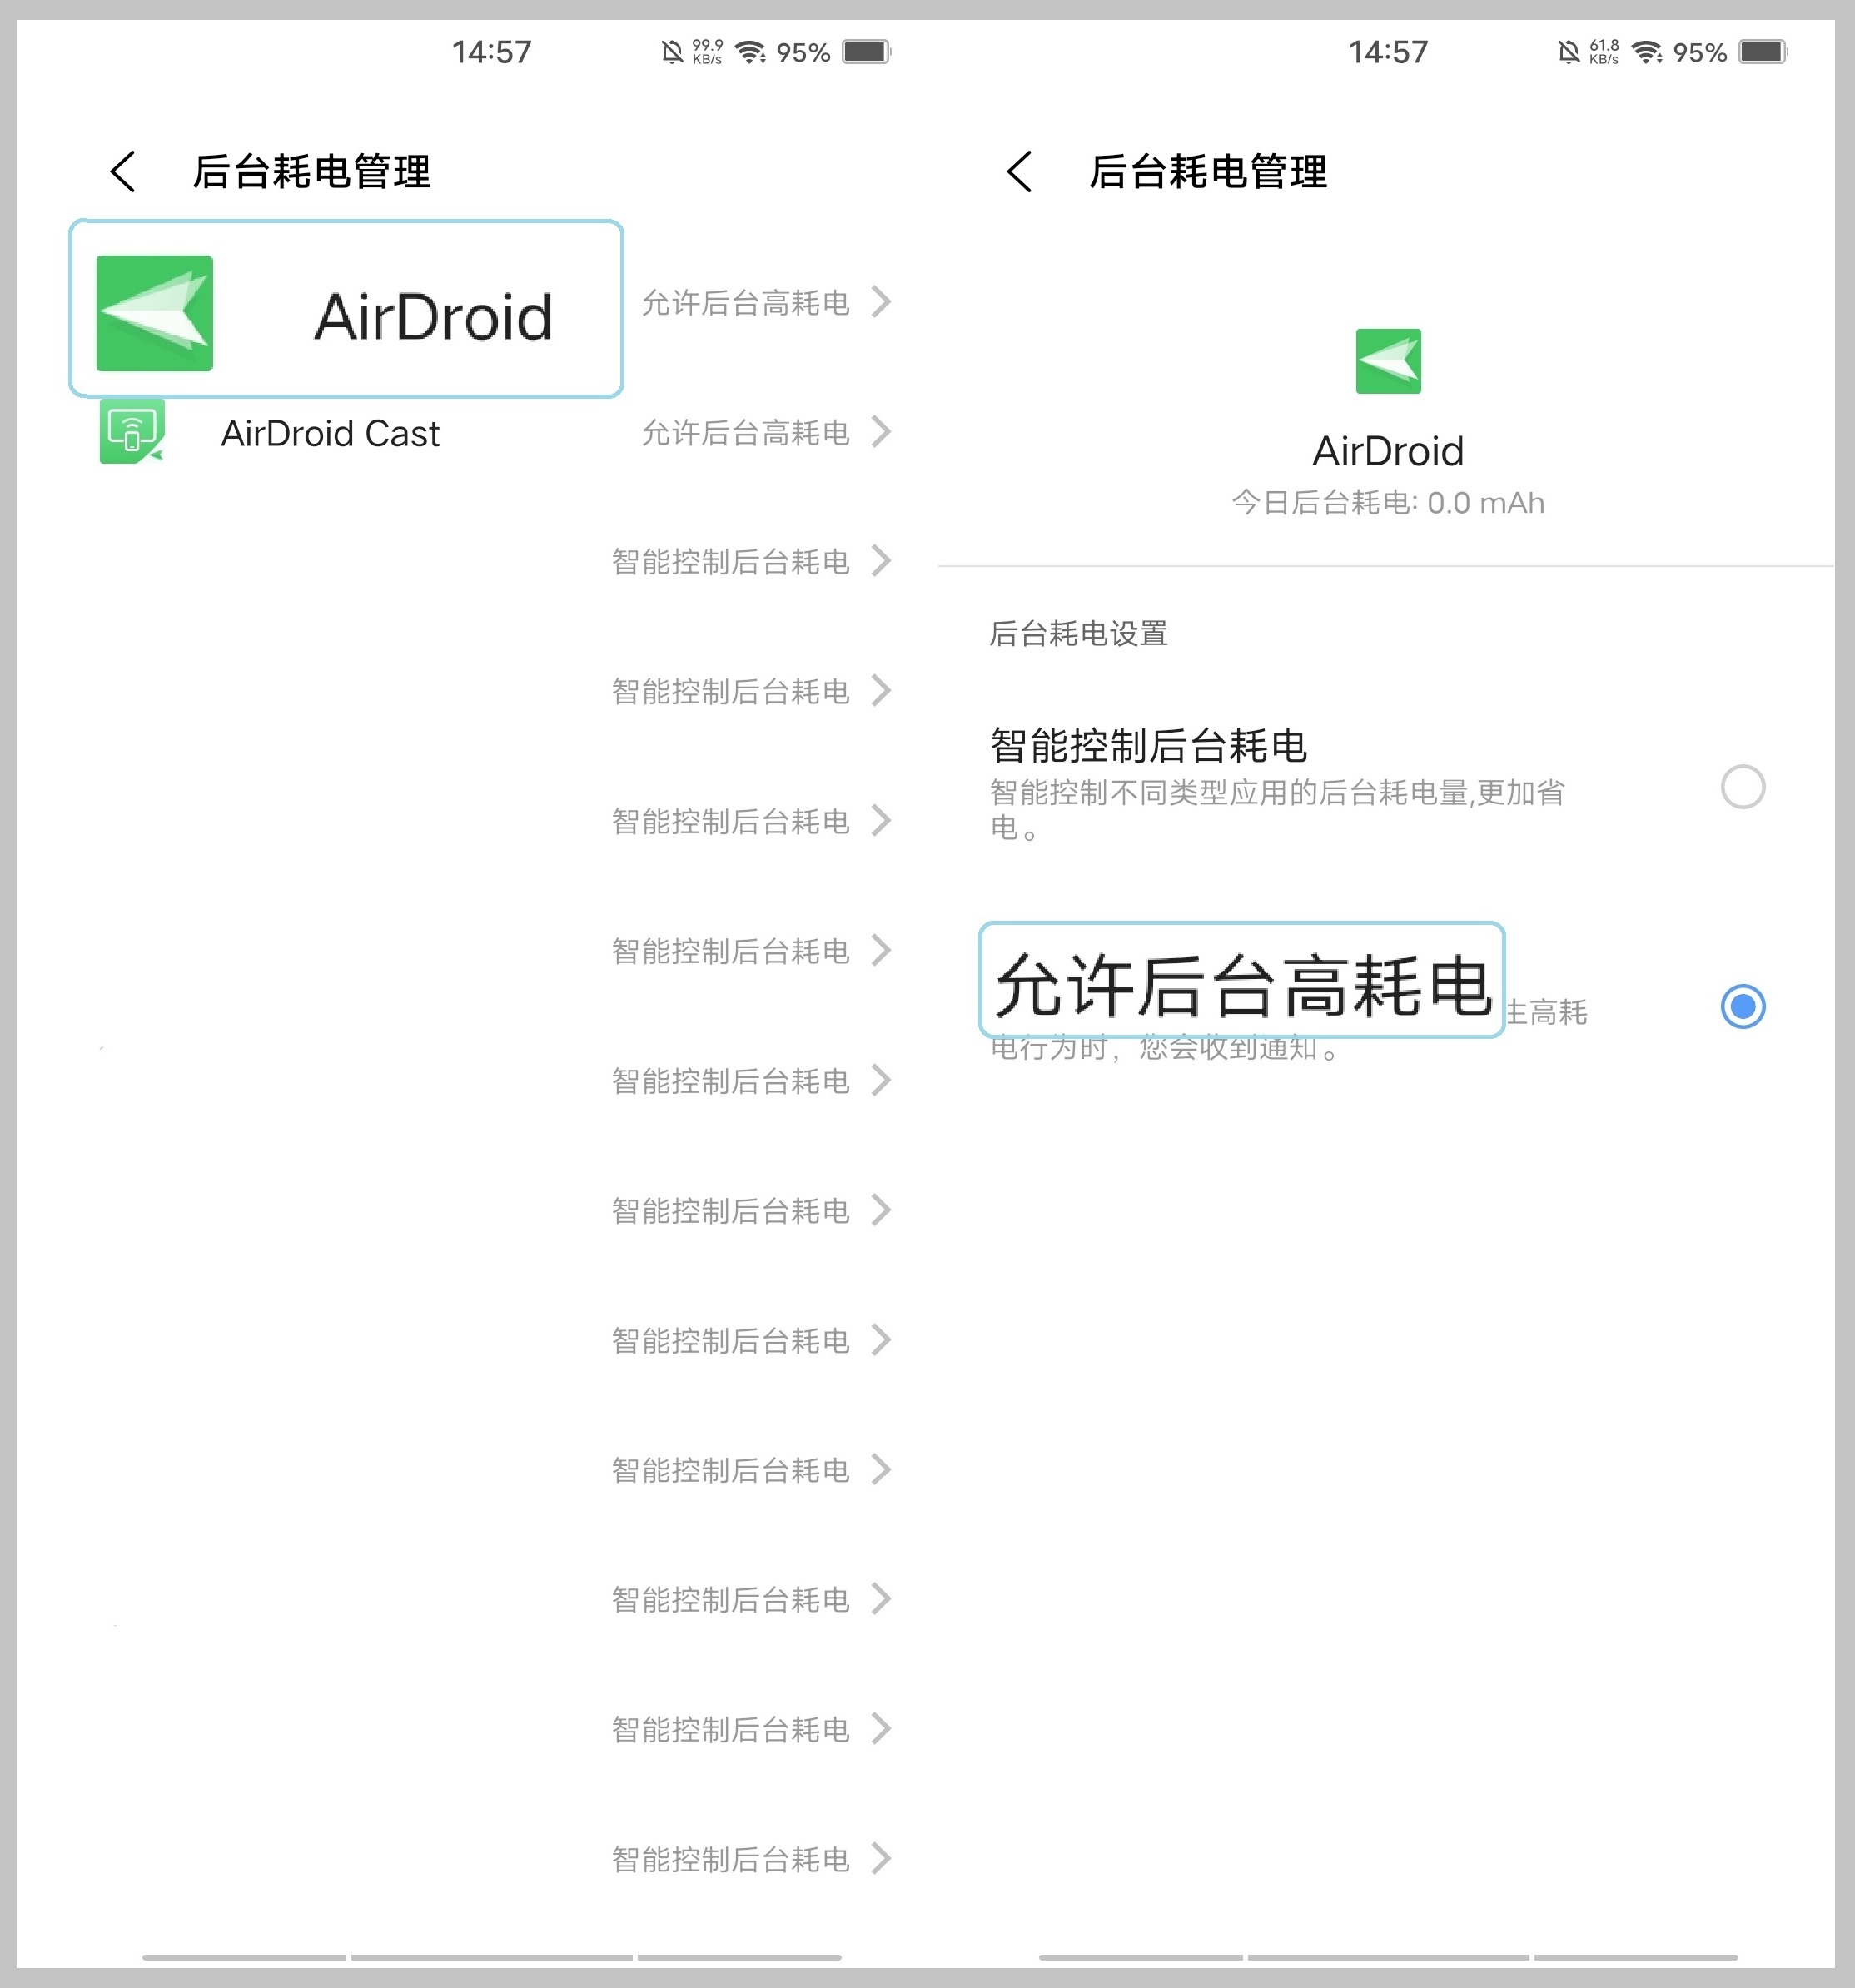 cn_-_Android_10_-_keep_AirDroid_running_on_vivo_-2.jpg